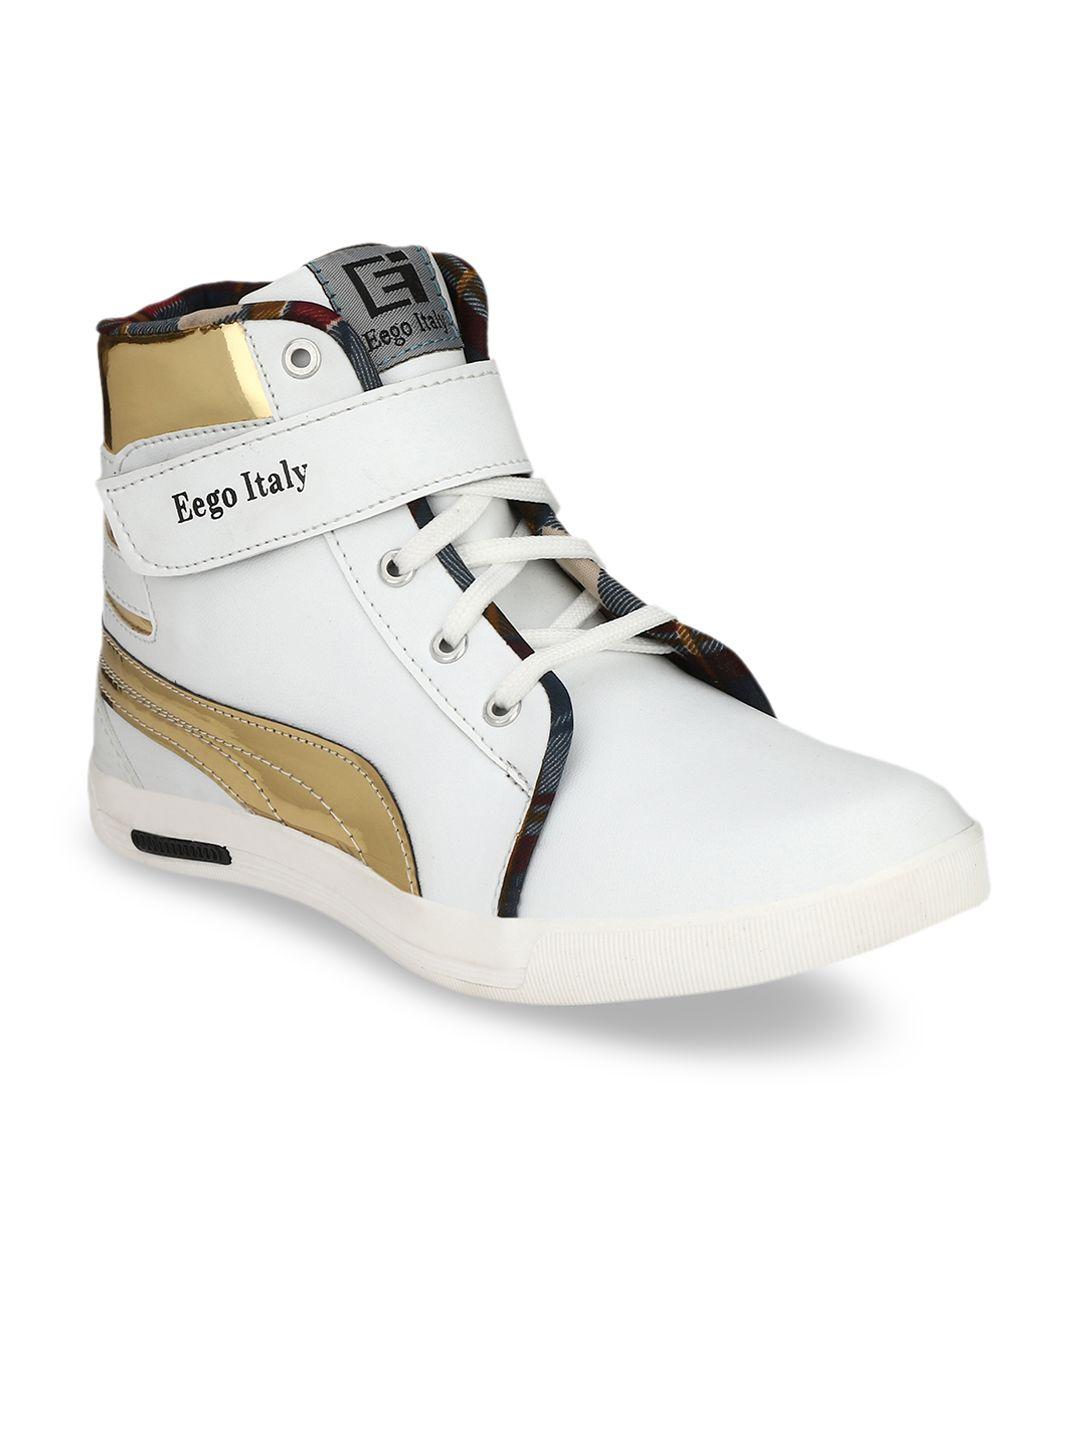 eego italy men white colourblocked synthetic high-top sneakers